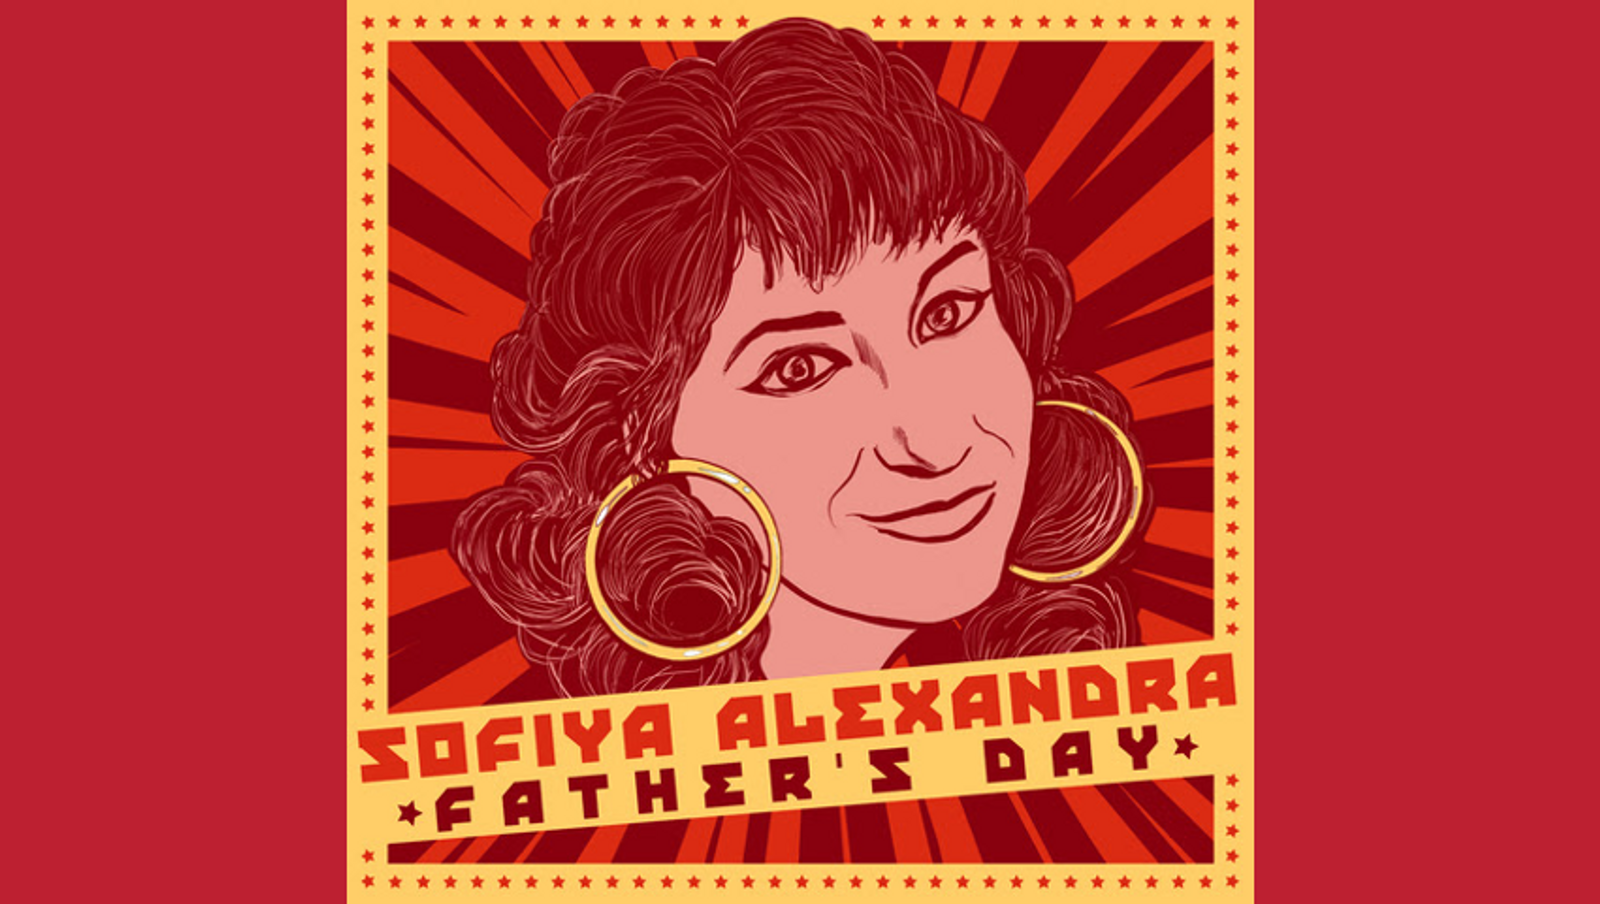 Sofiya Alexandra Launches Debut Comedy Album for Father’s Day